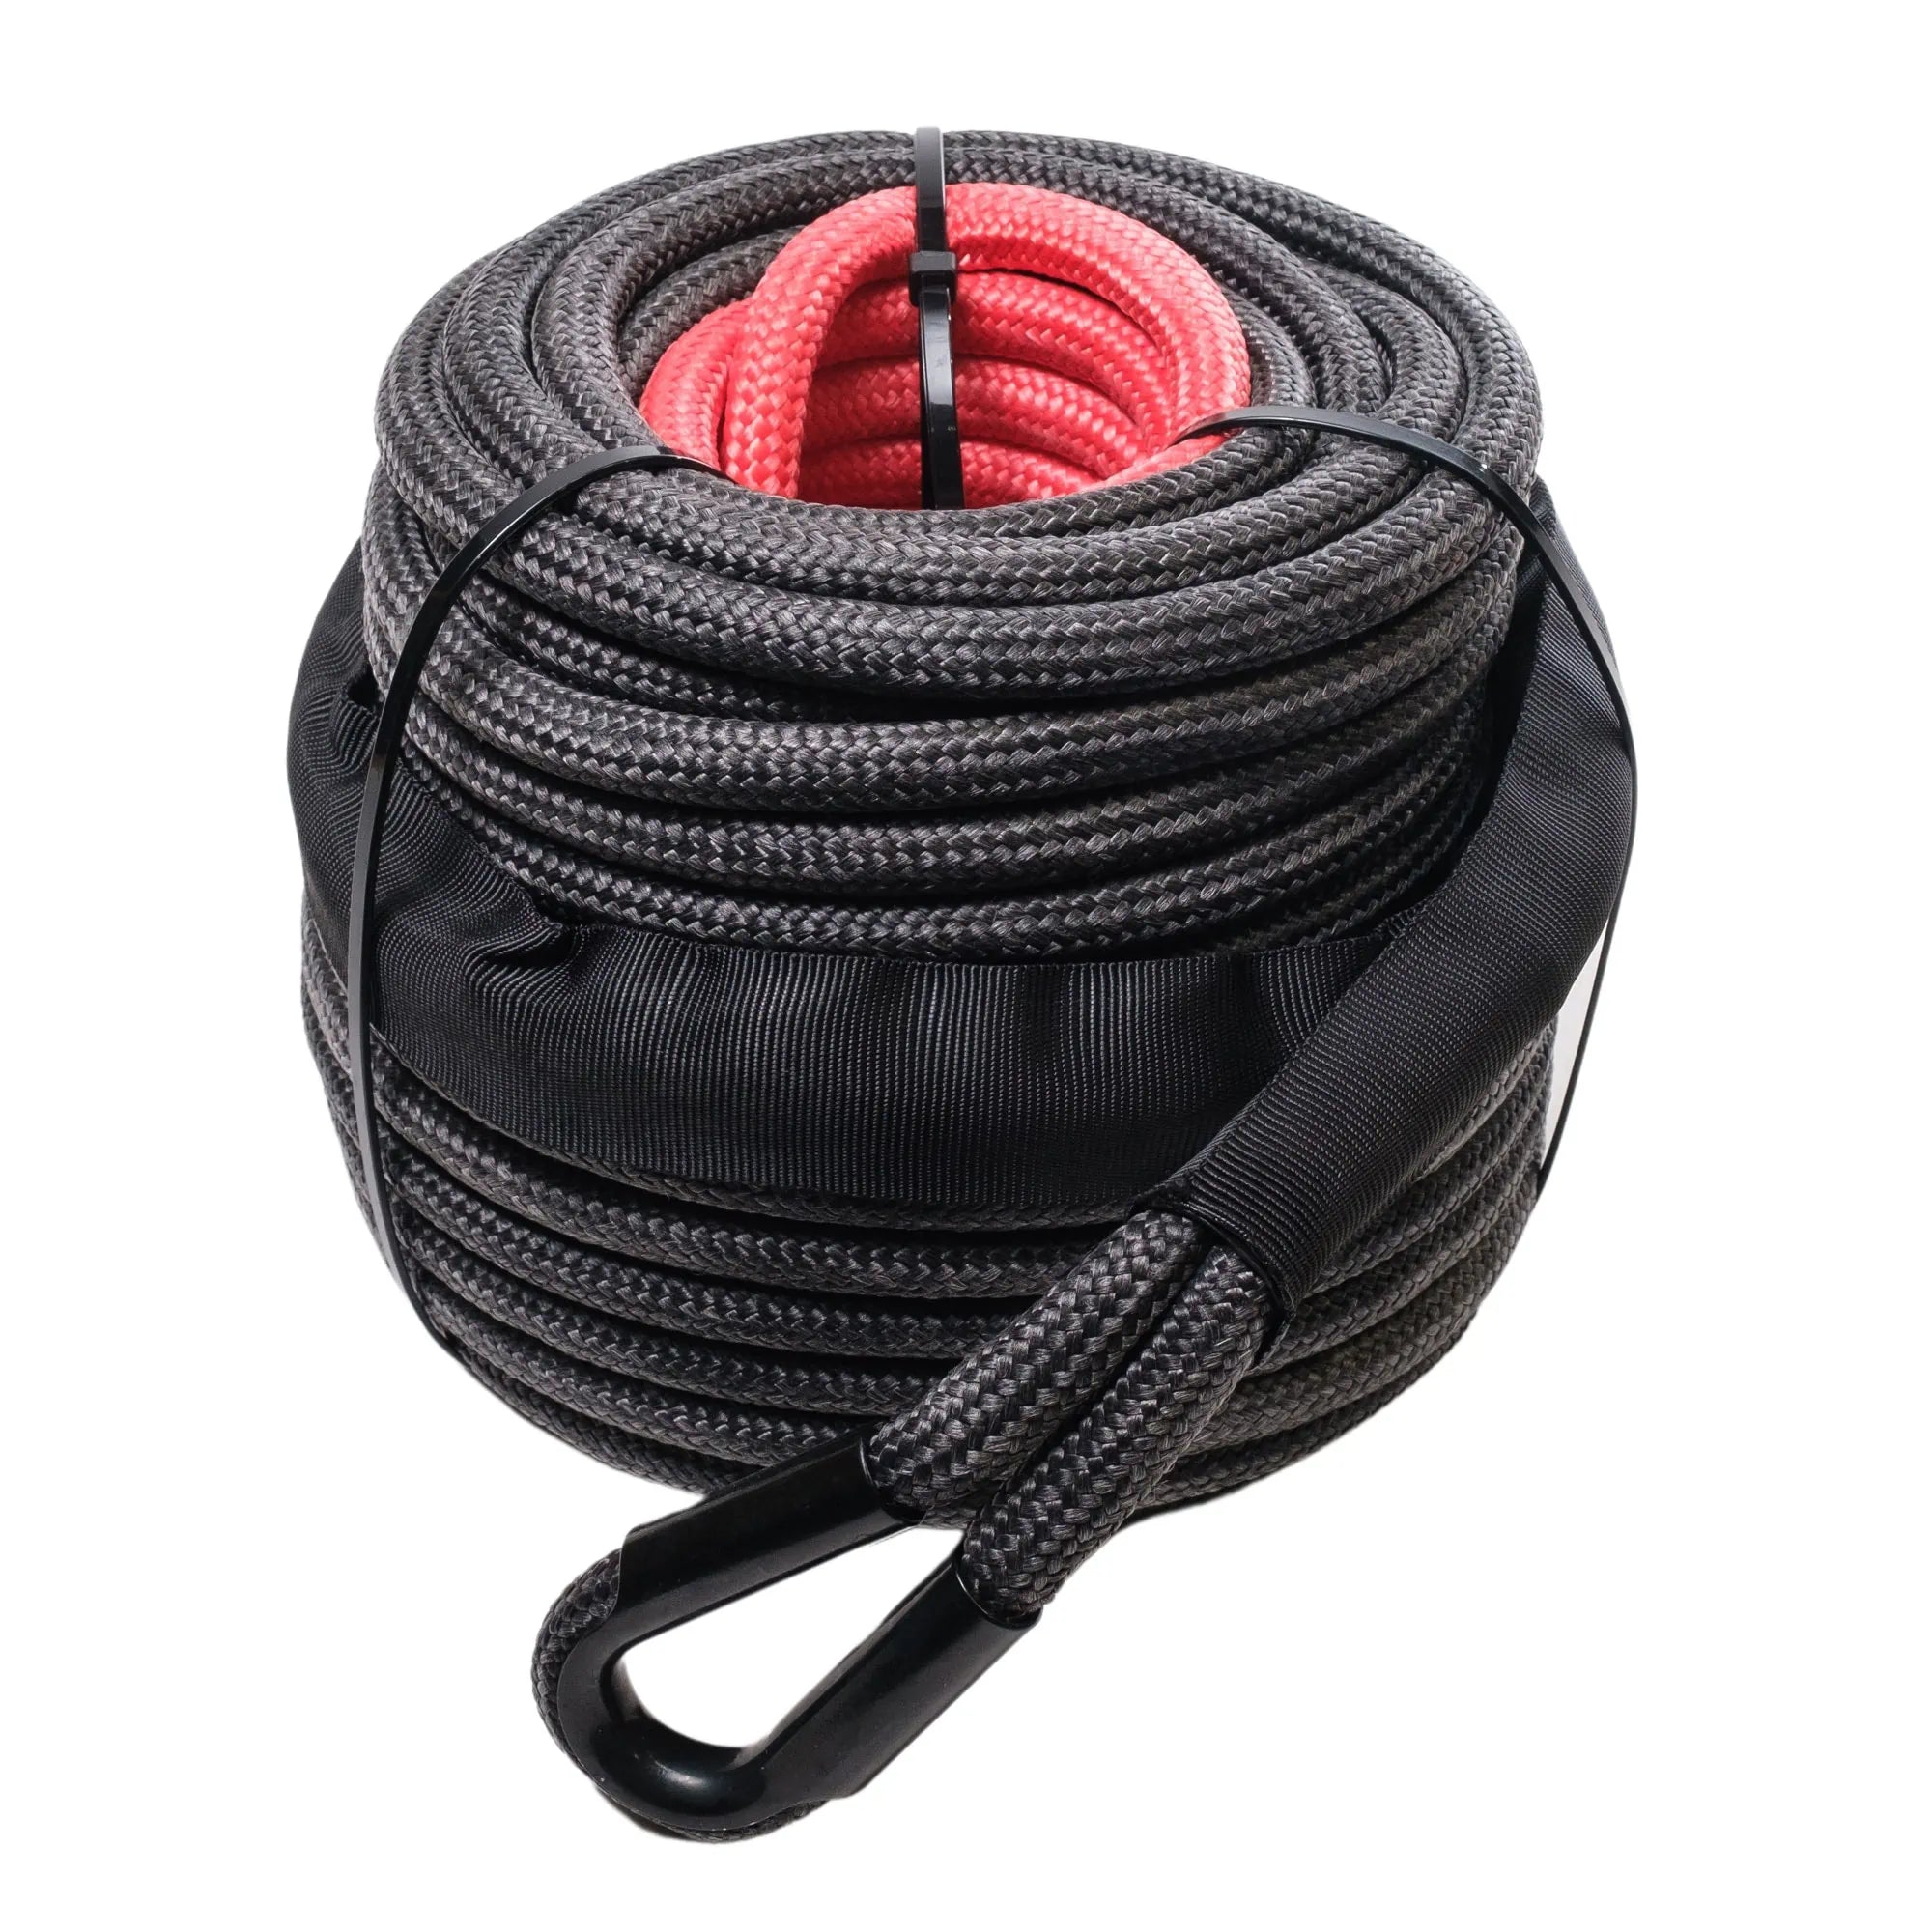 Saber Pro Double Braided 30M Winch Rope